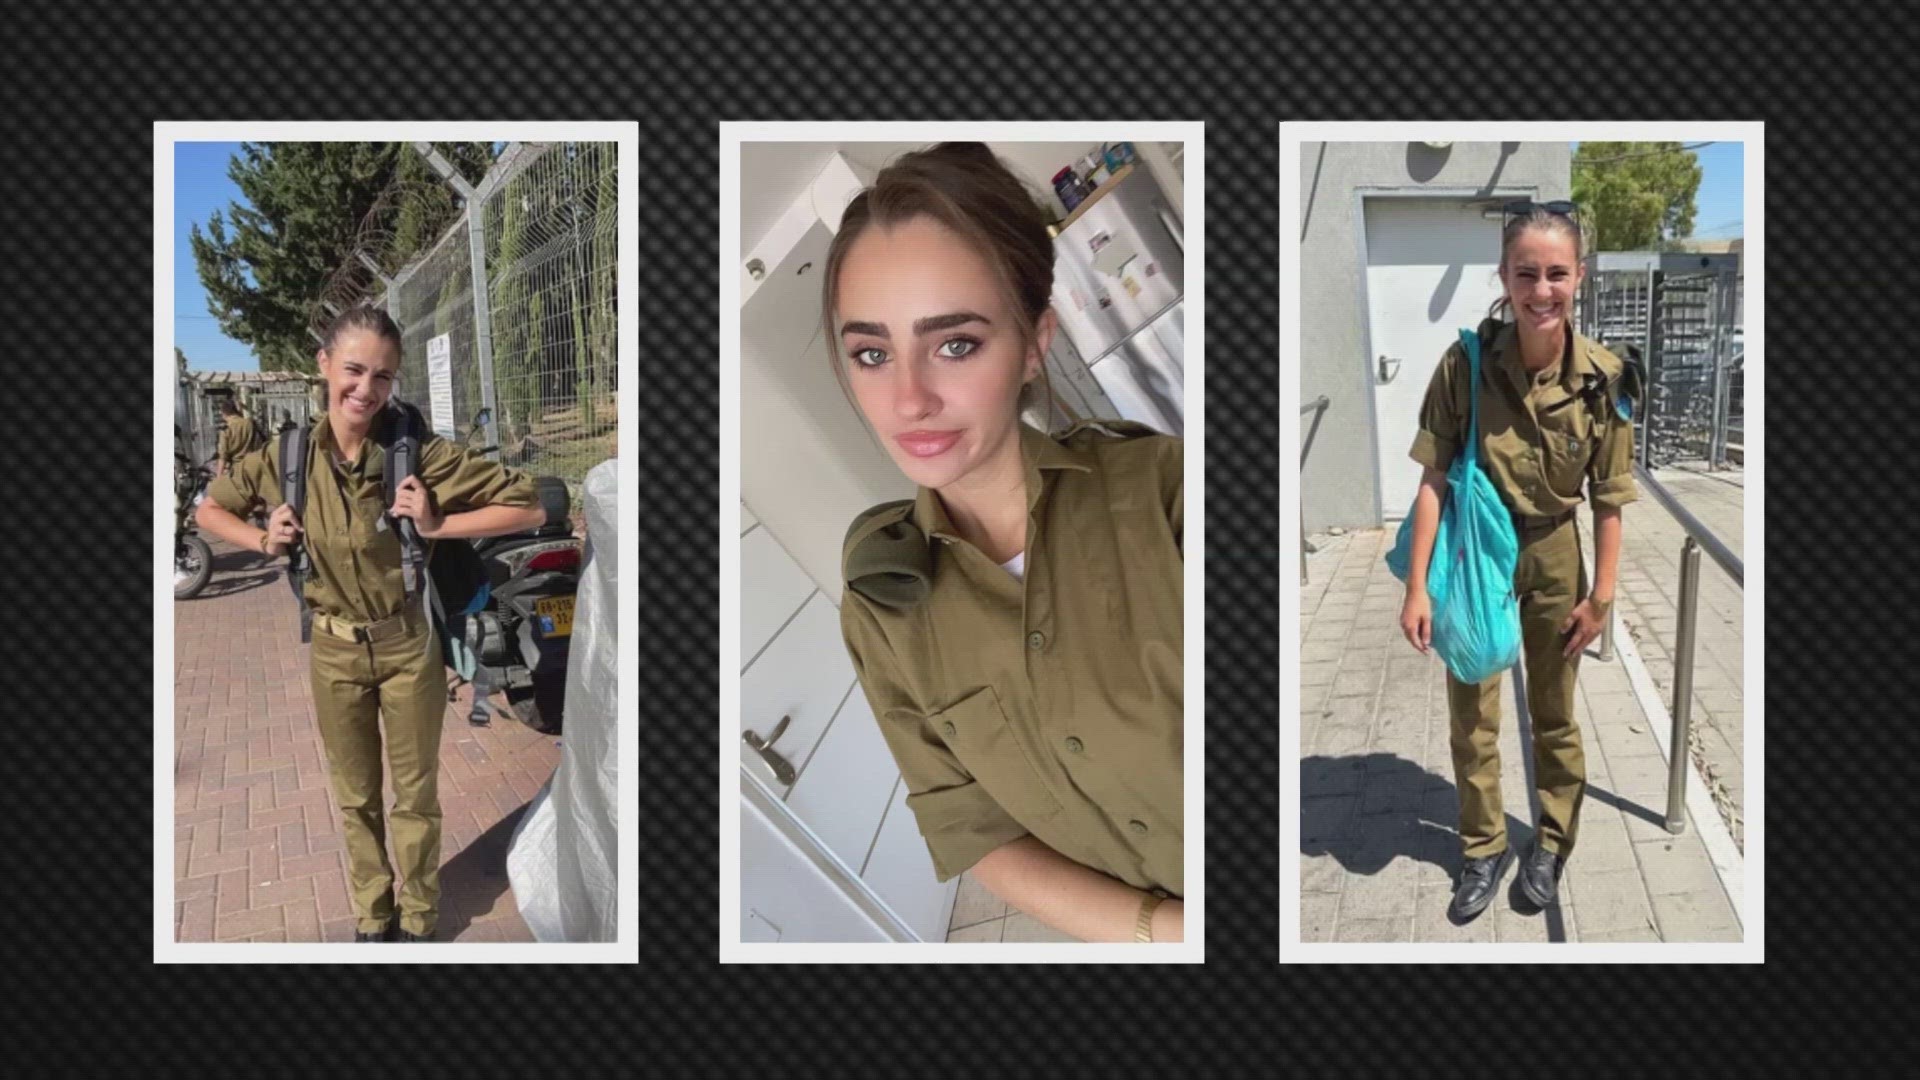 "She came up with this idea on her own in middle school, that when she graduated she wanted to move to Israel and join the army," said Eddy Daniels.